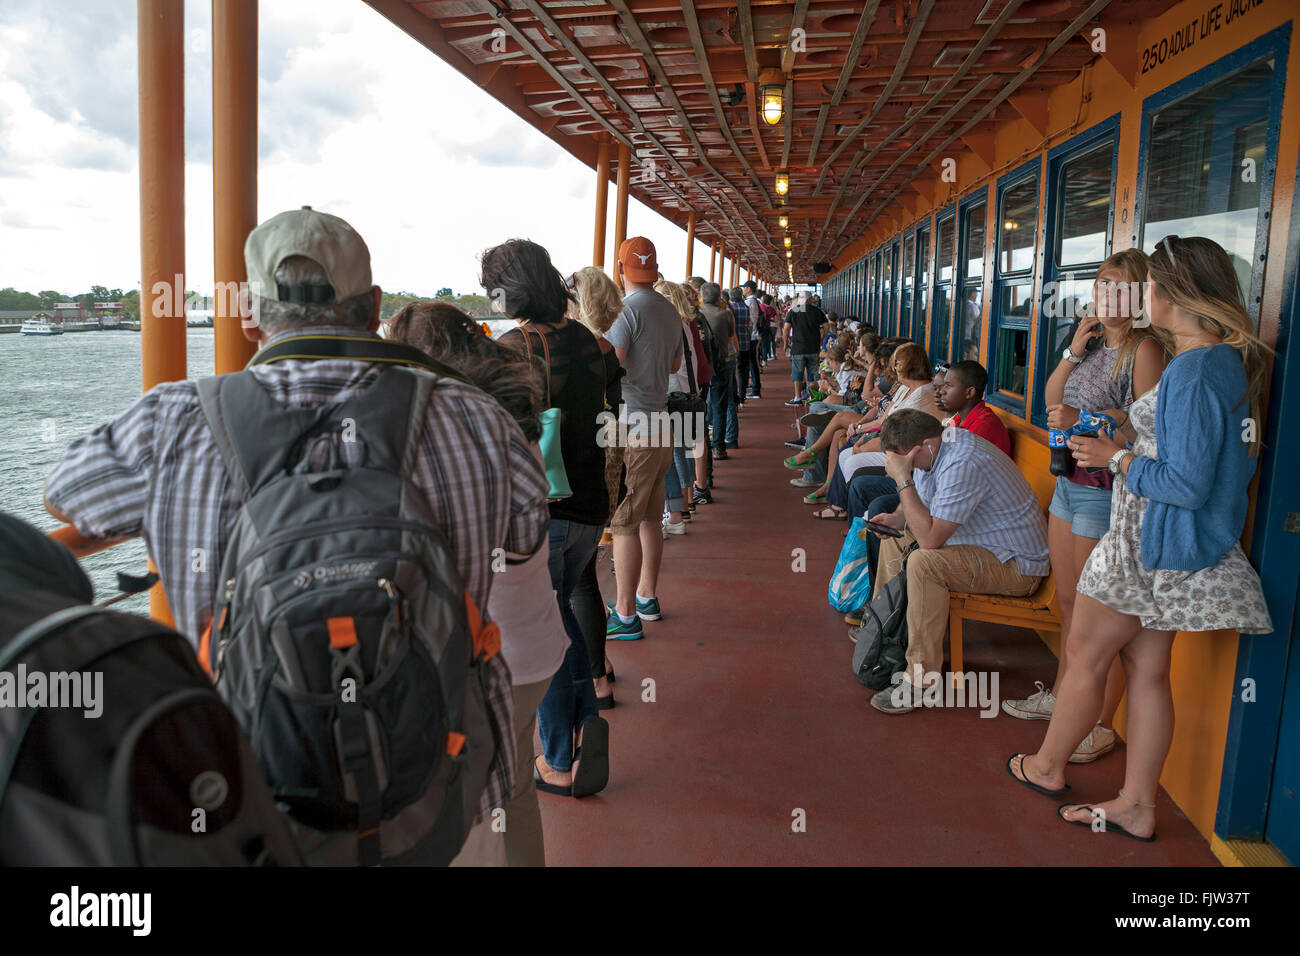 Passengers enjoy the views on the Staten Island Ferry in New York City. Stock Photo